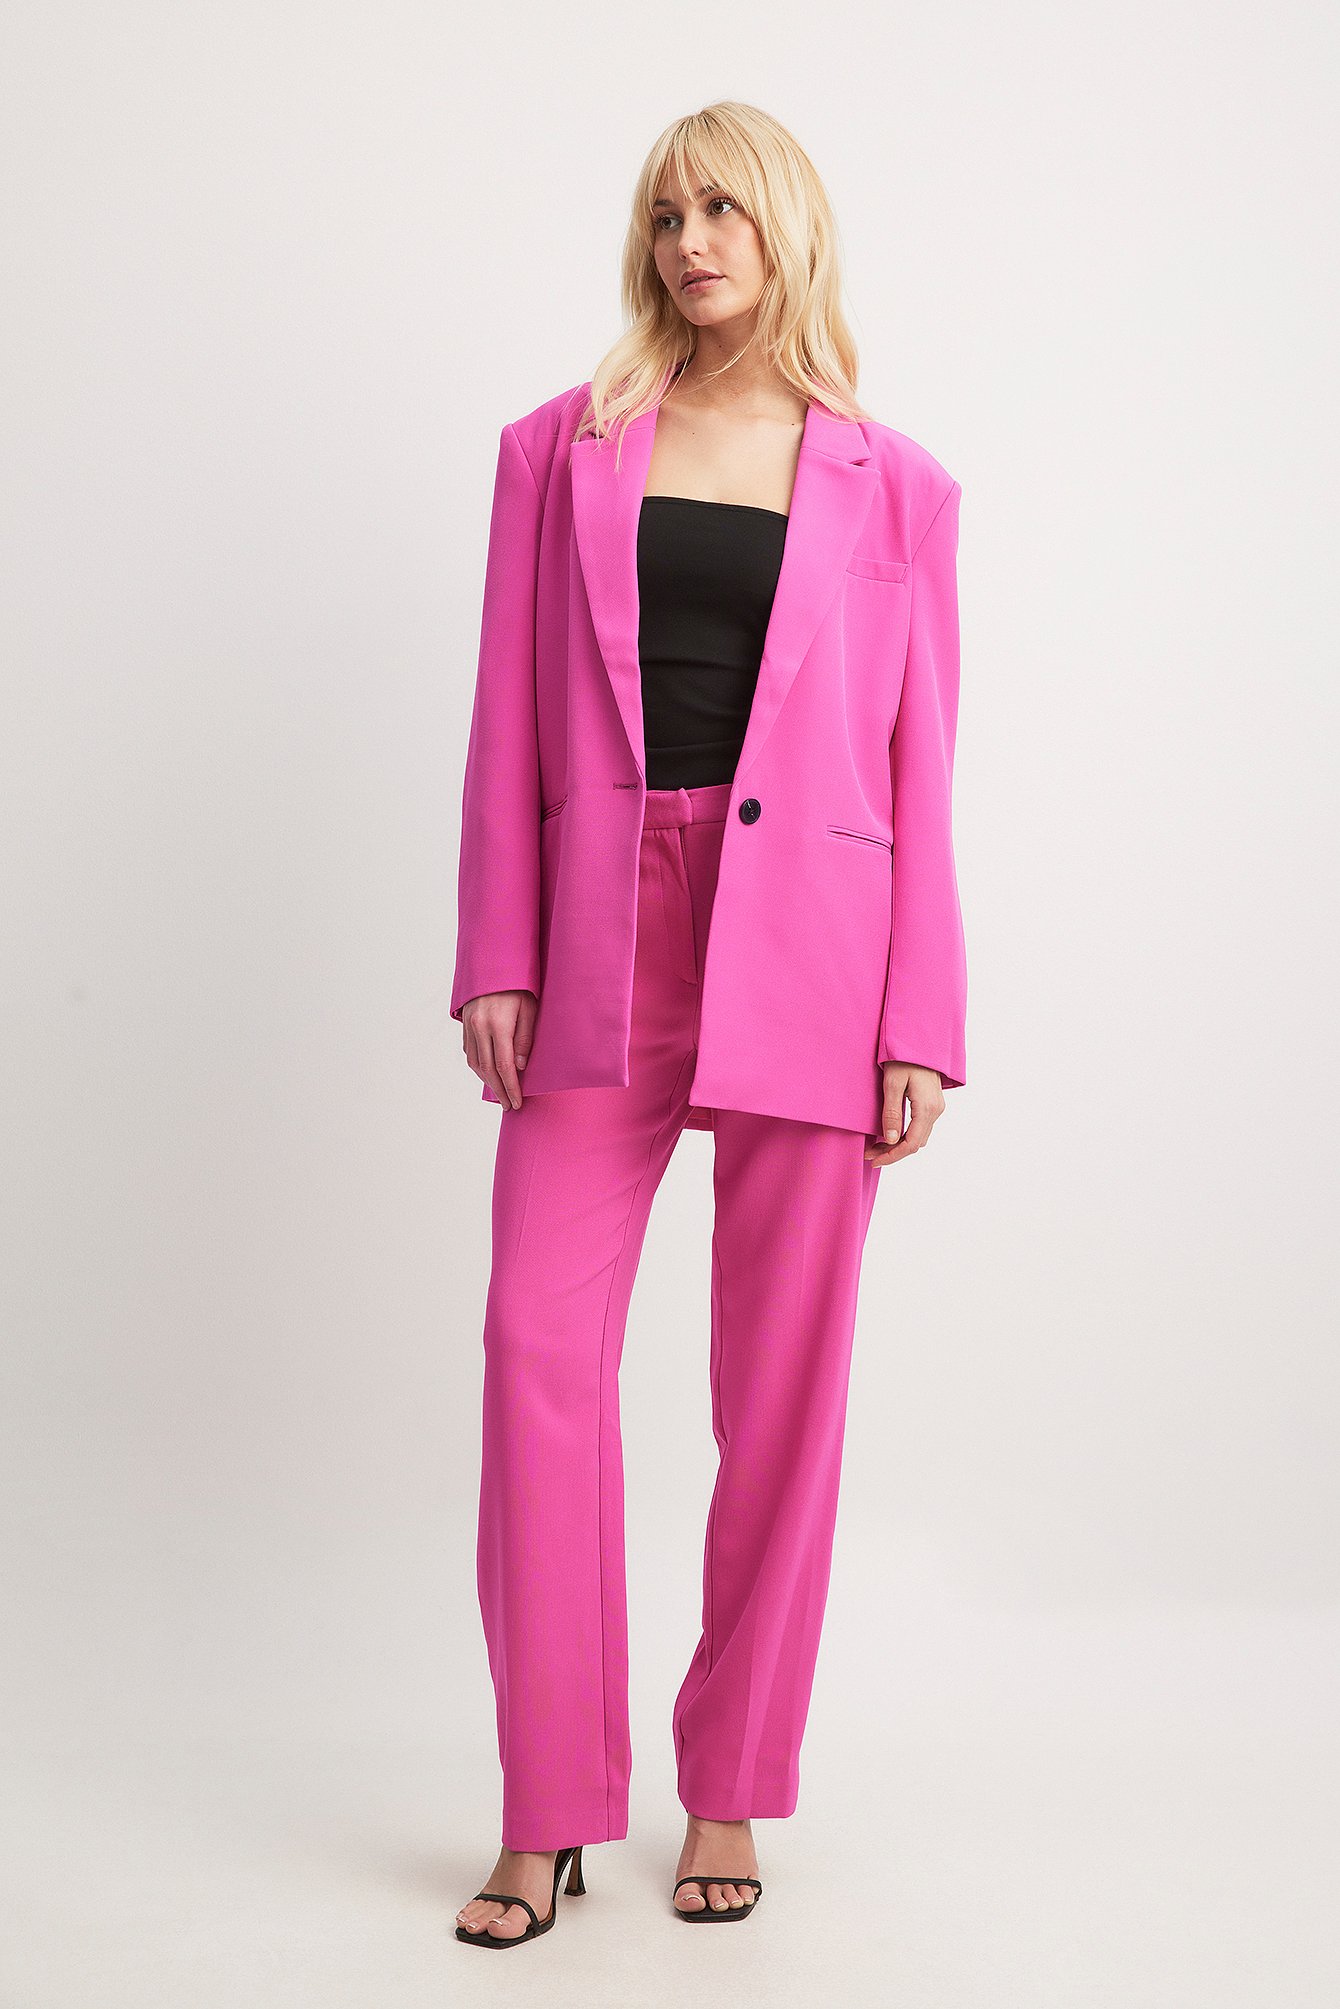 Womens Pink Double Breasted Blazer And Next Ladies Trouser Suits Set For  Formal Business And Office Wear From Paomiao, $57.66 | DHgate.Com